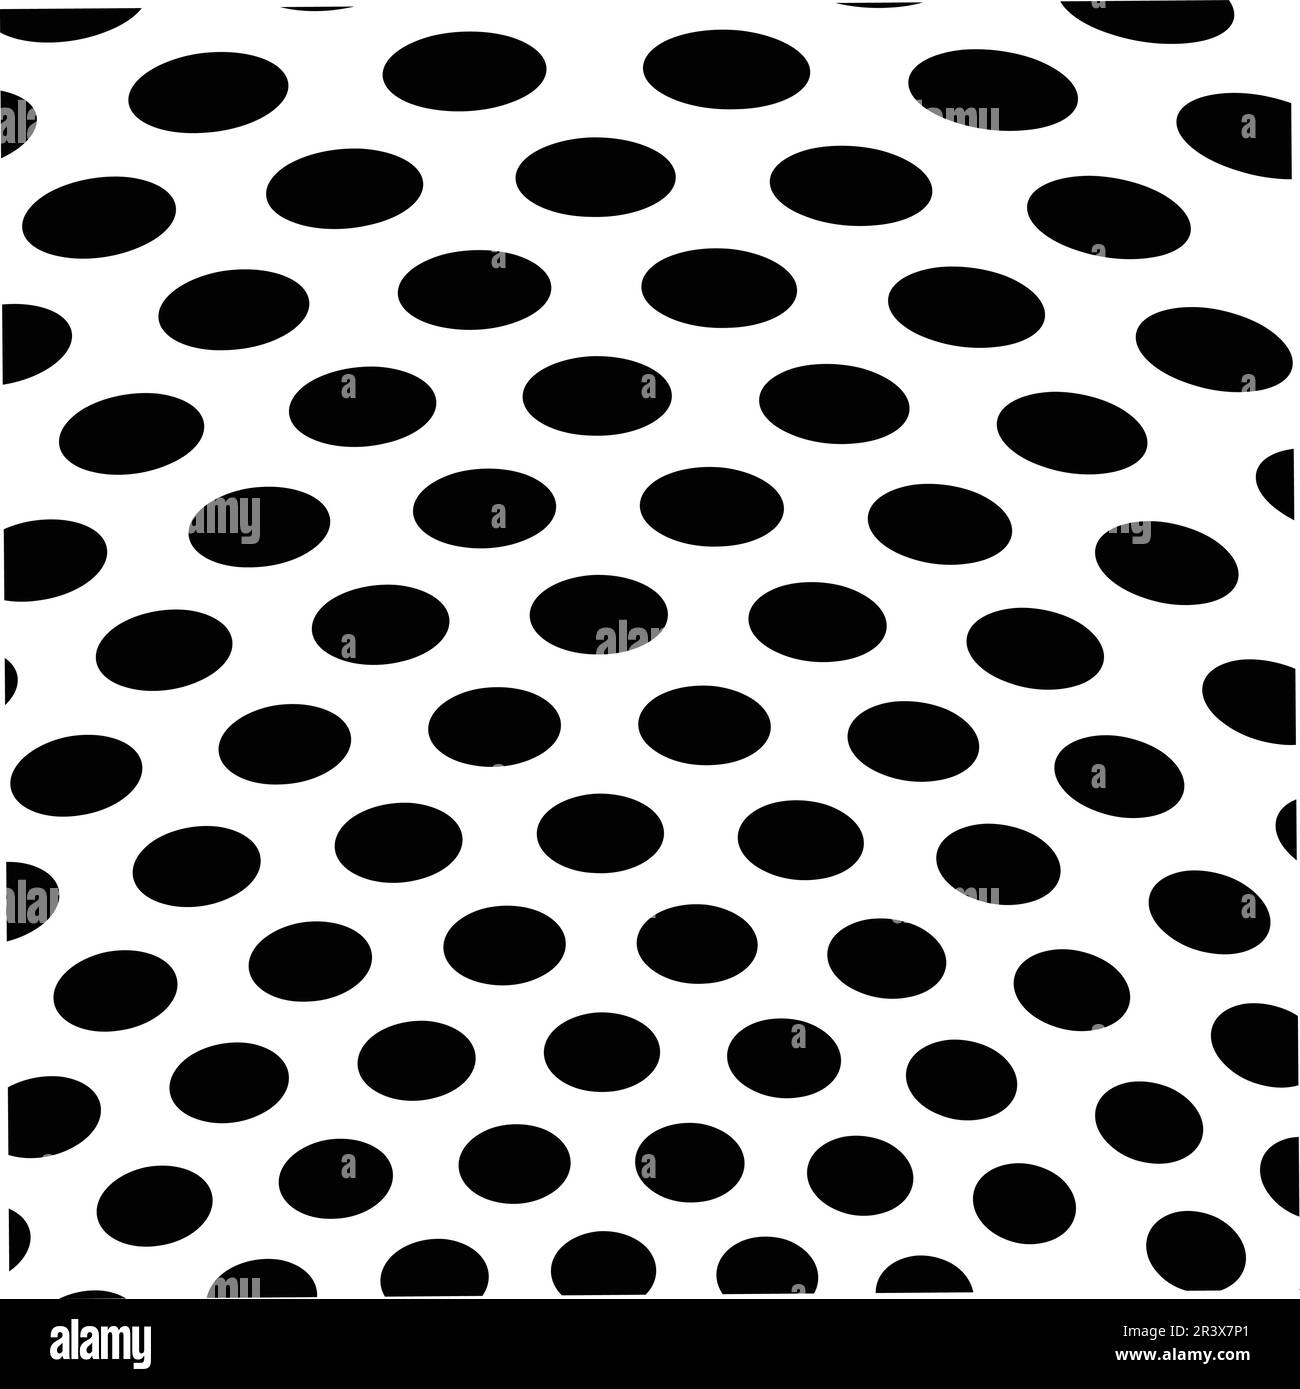 vector layout with circle shape. polka dot decorative design in abstract style Stock Vector